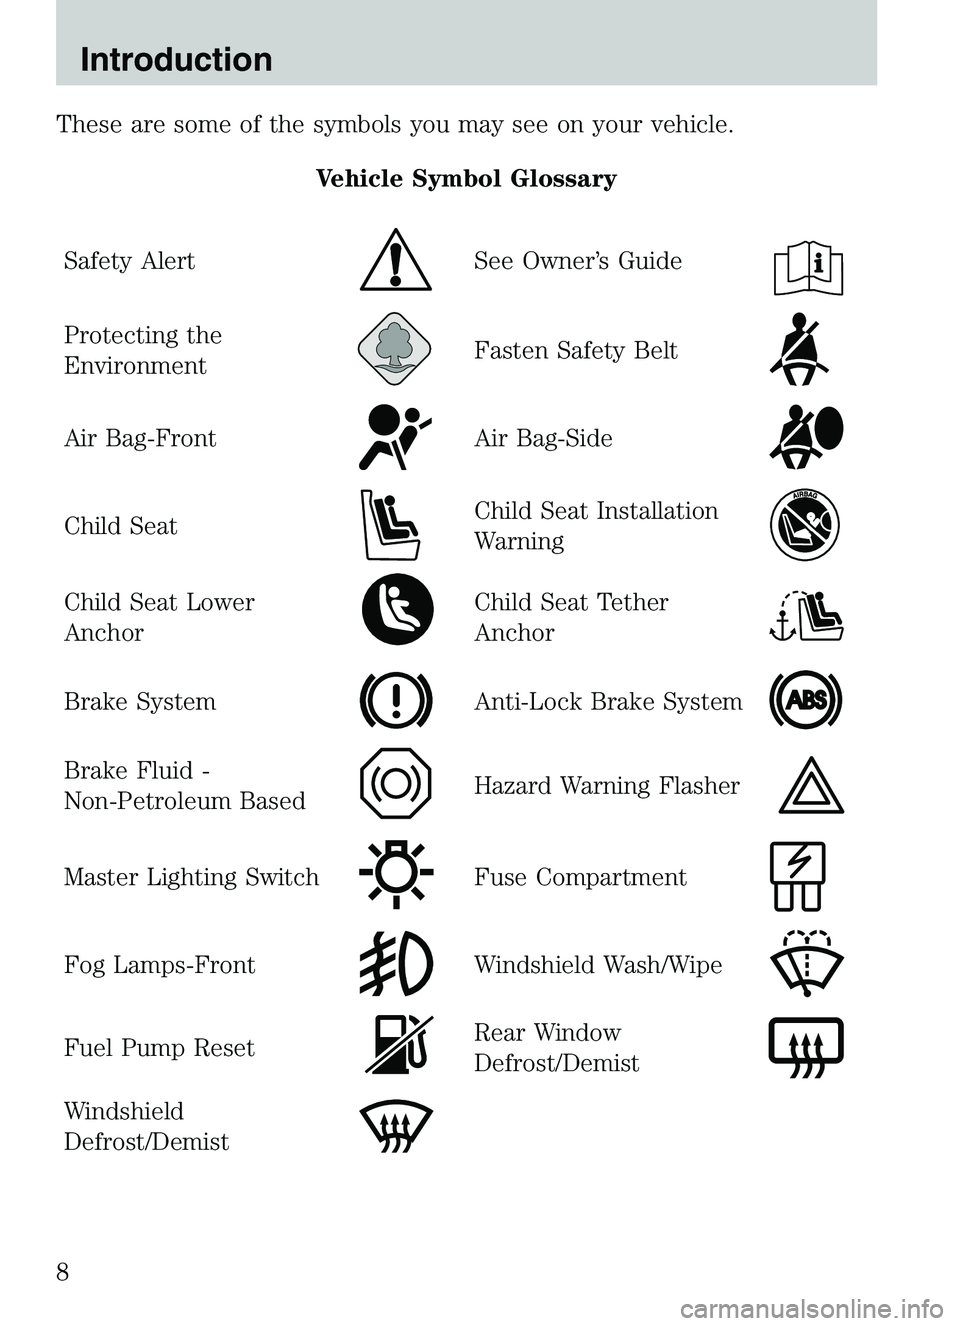 MAZDA MODEL B4000 4WD 2003  Owners Manual These are some of the symbols you may see on your vehicle.Vehicle Symbol Glossary
Safety Alert
See Owner’s Guide
Protecting the
EnvironmentFasten Safety Belt
Air Bag-FrontAir Bag-Side
Child SeatChil